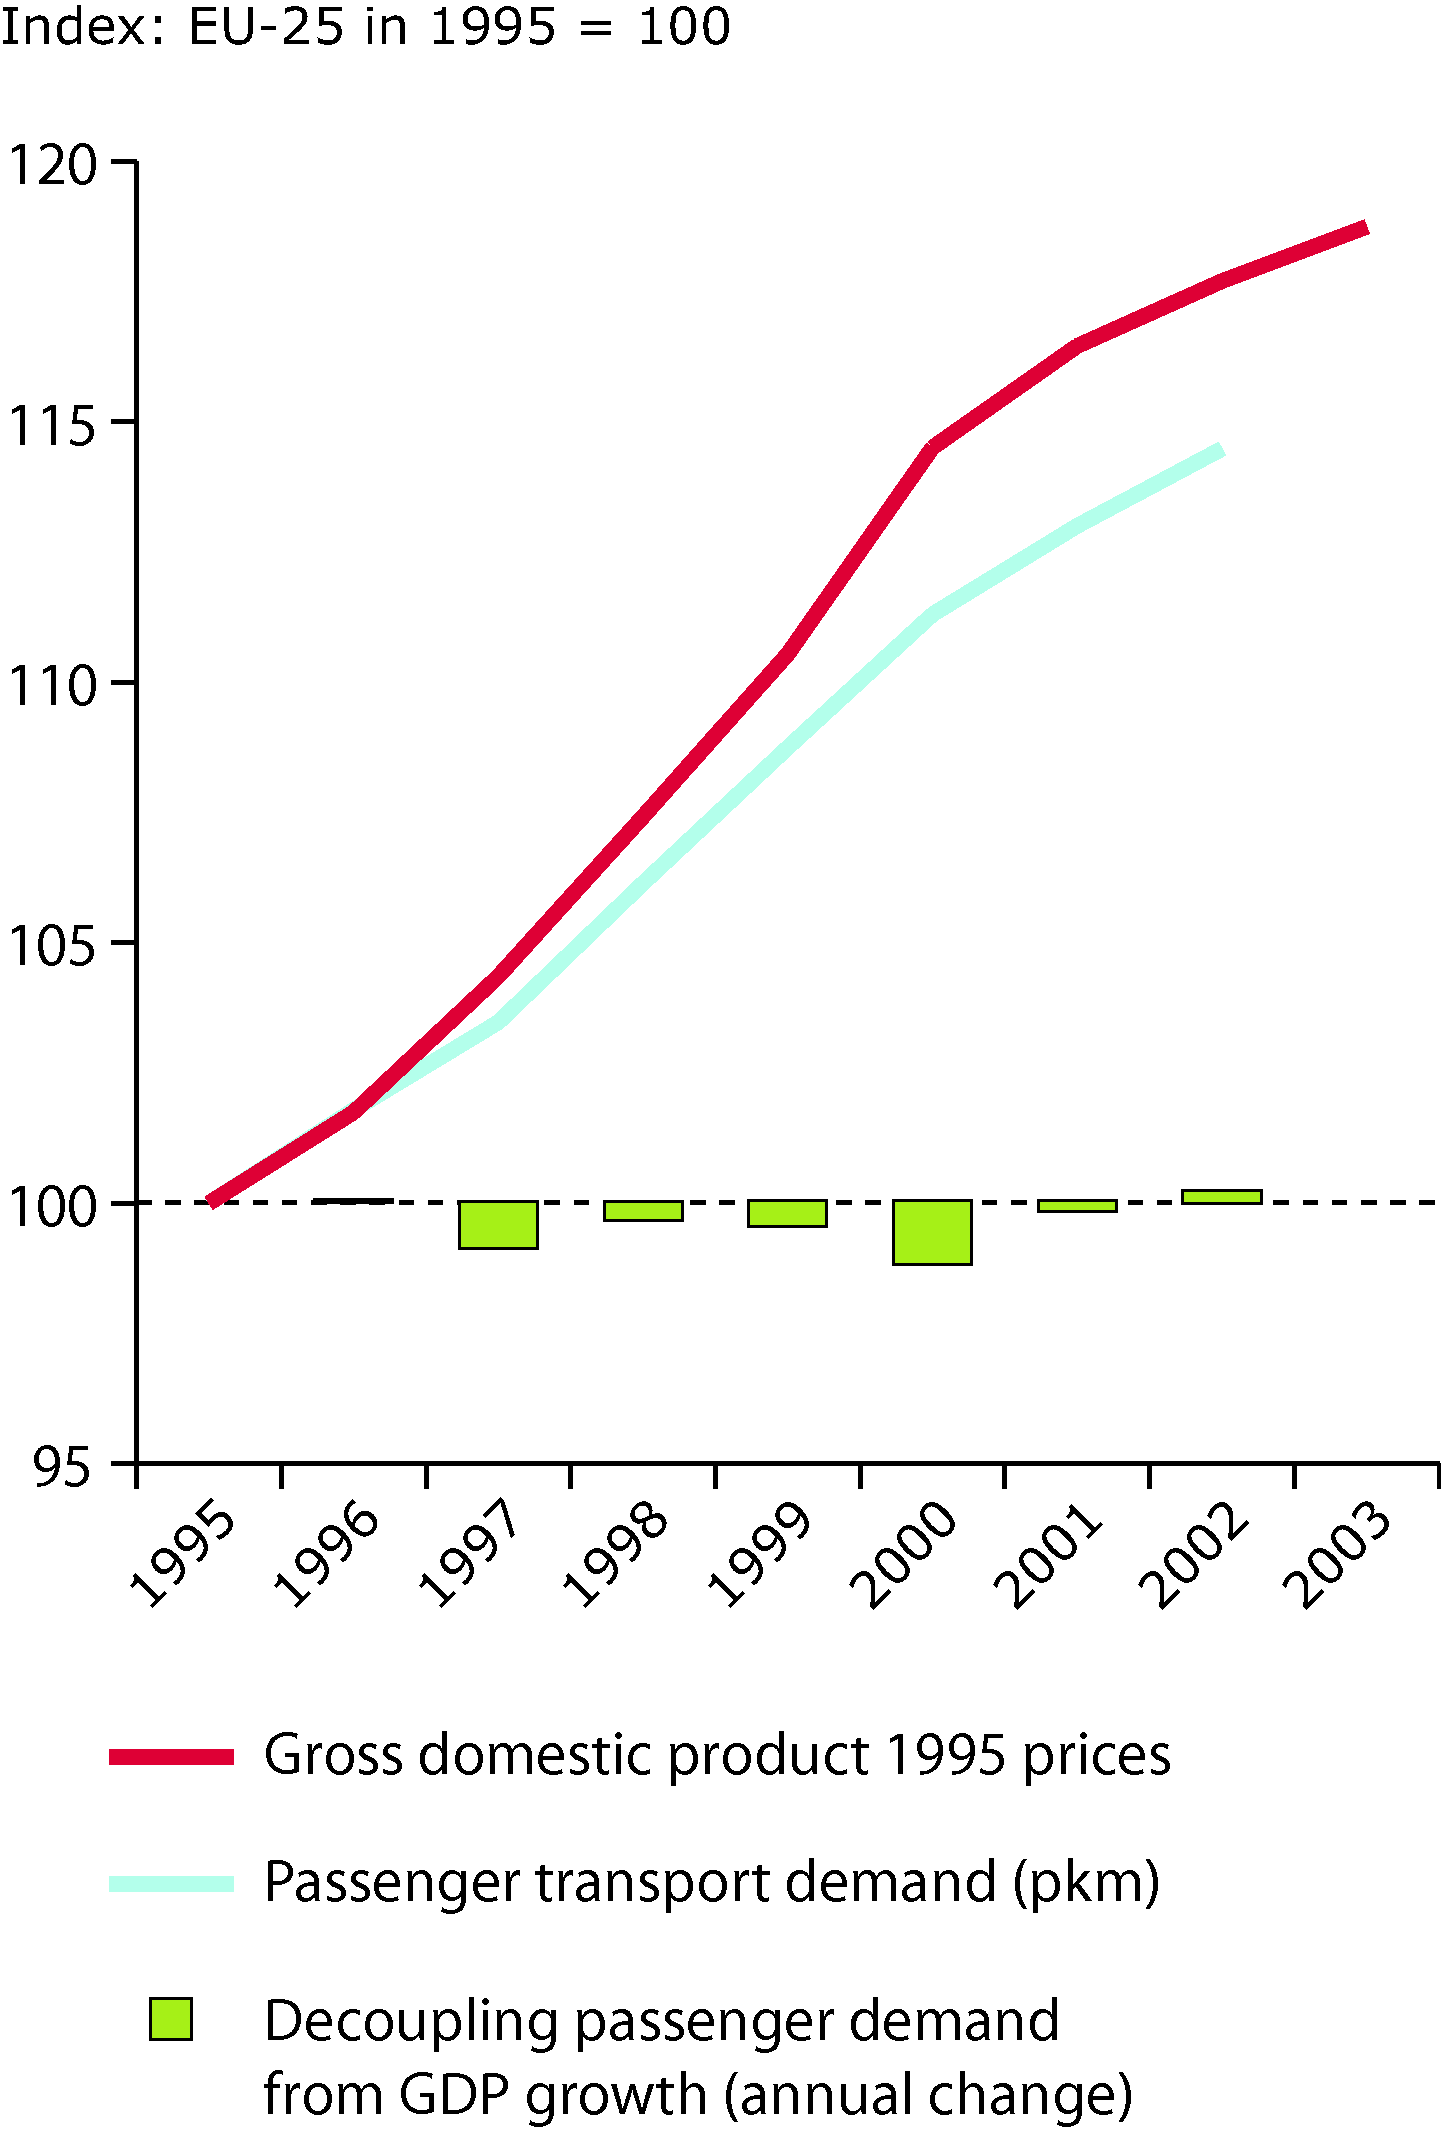 Trend in passenger transport demand and GDP